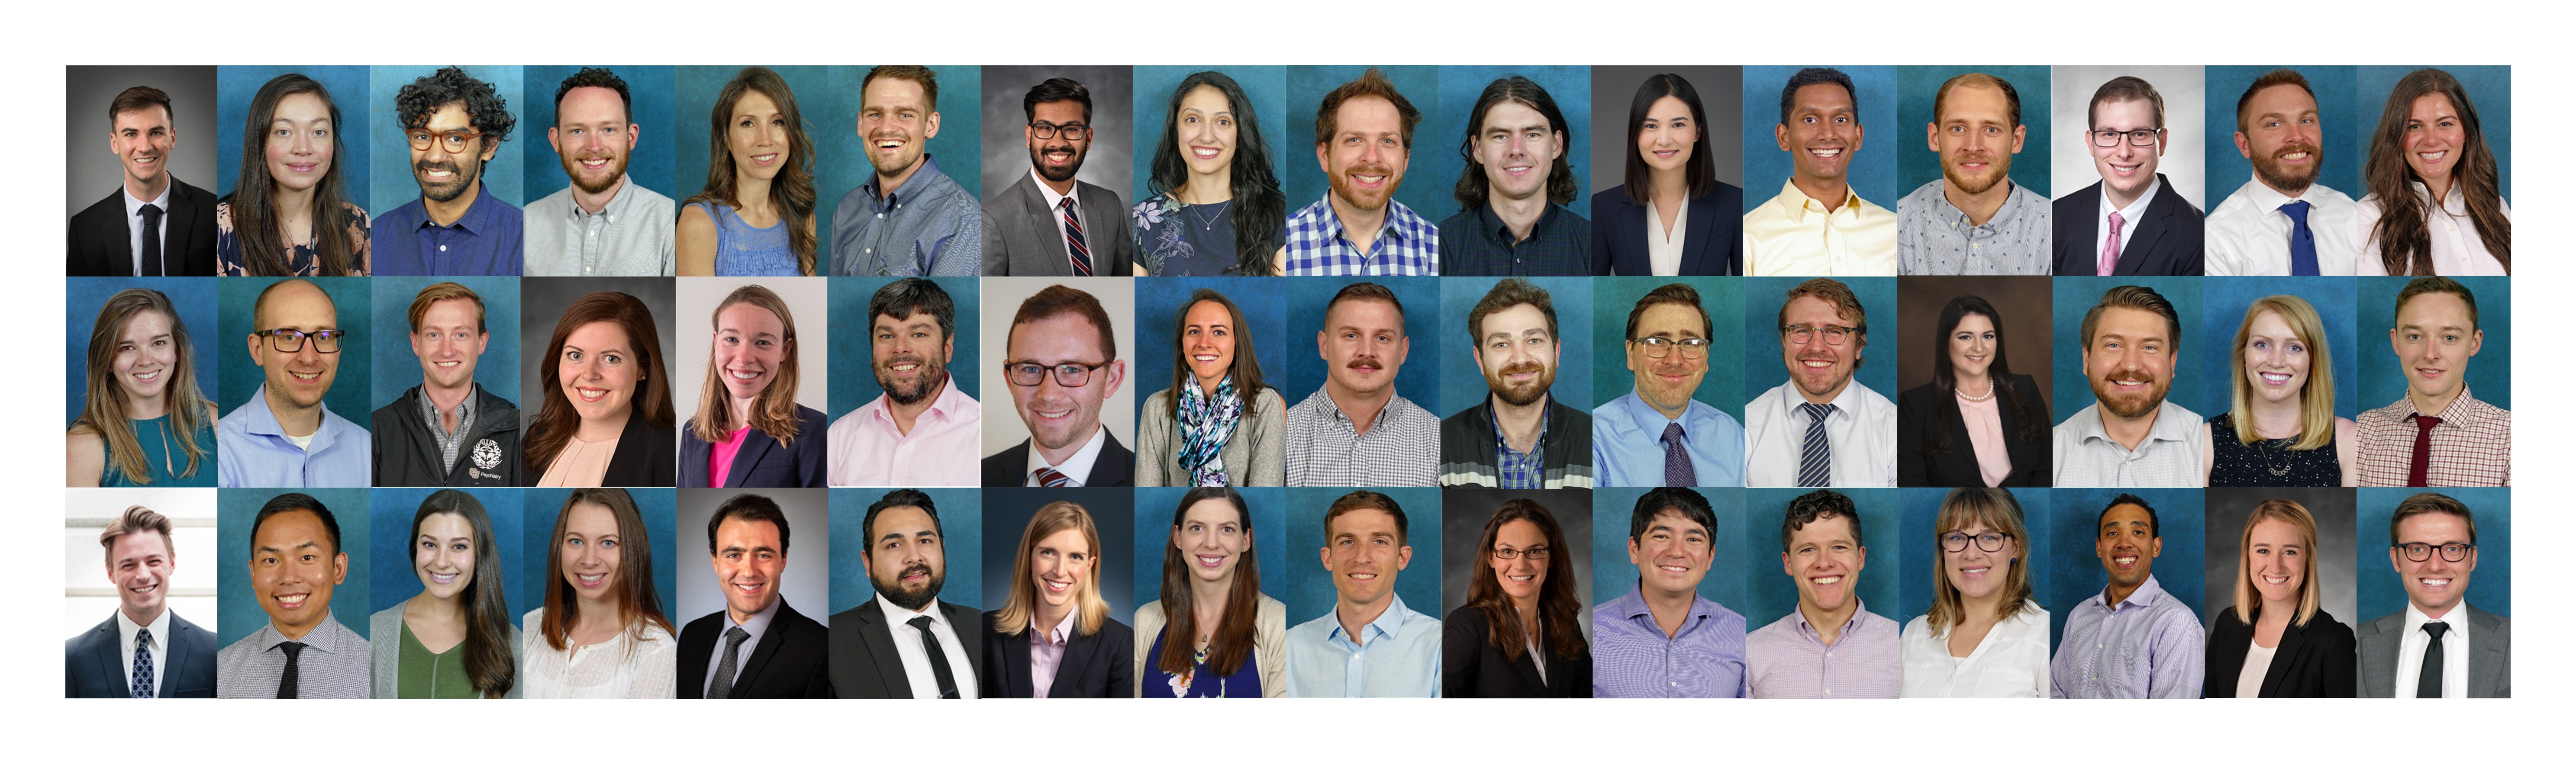 Residency/Fellowship Composite Picture 2019